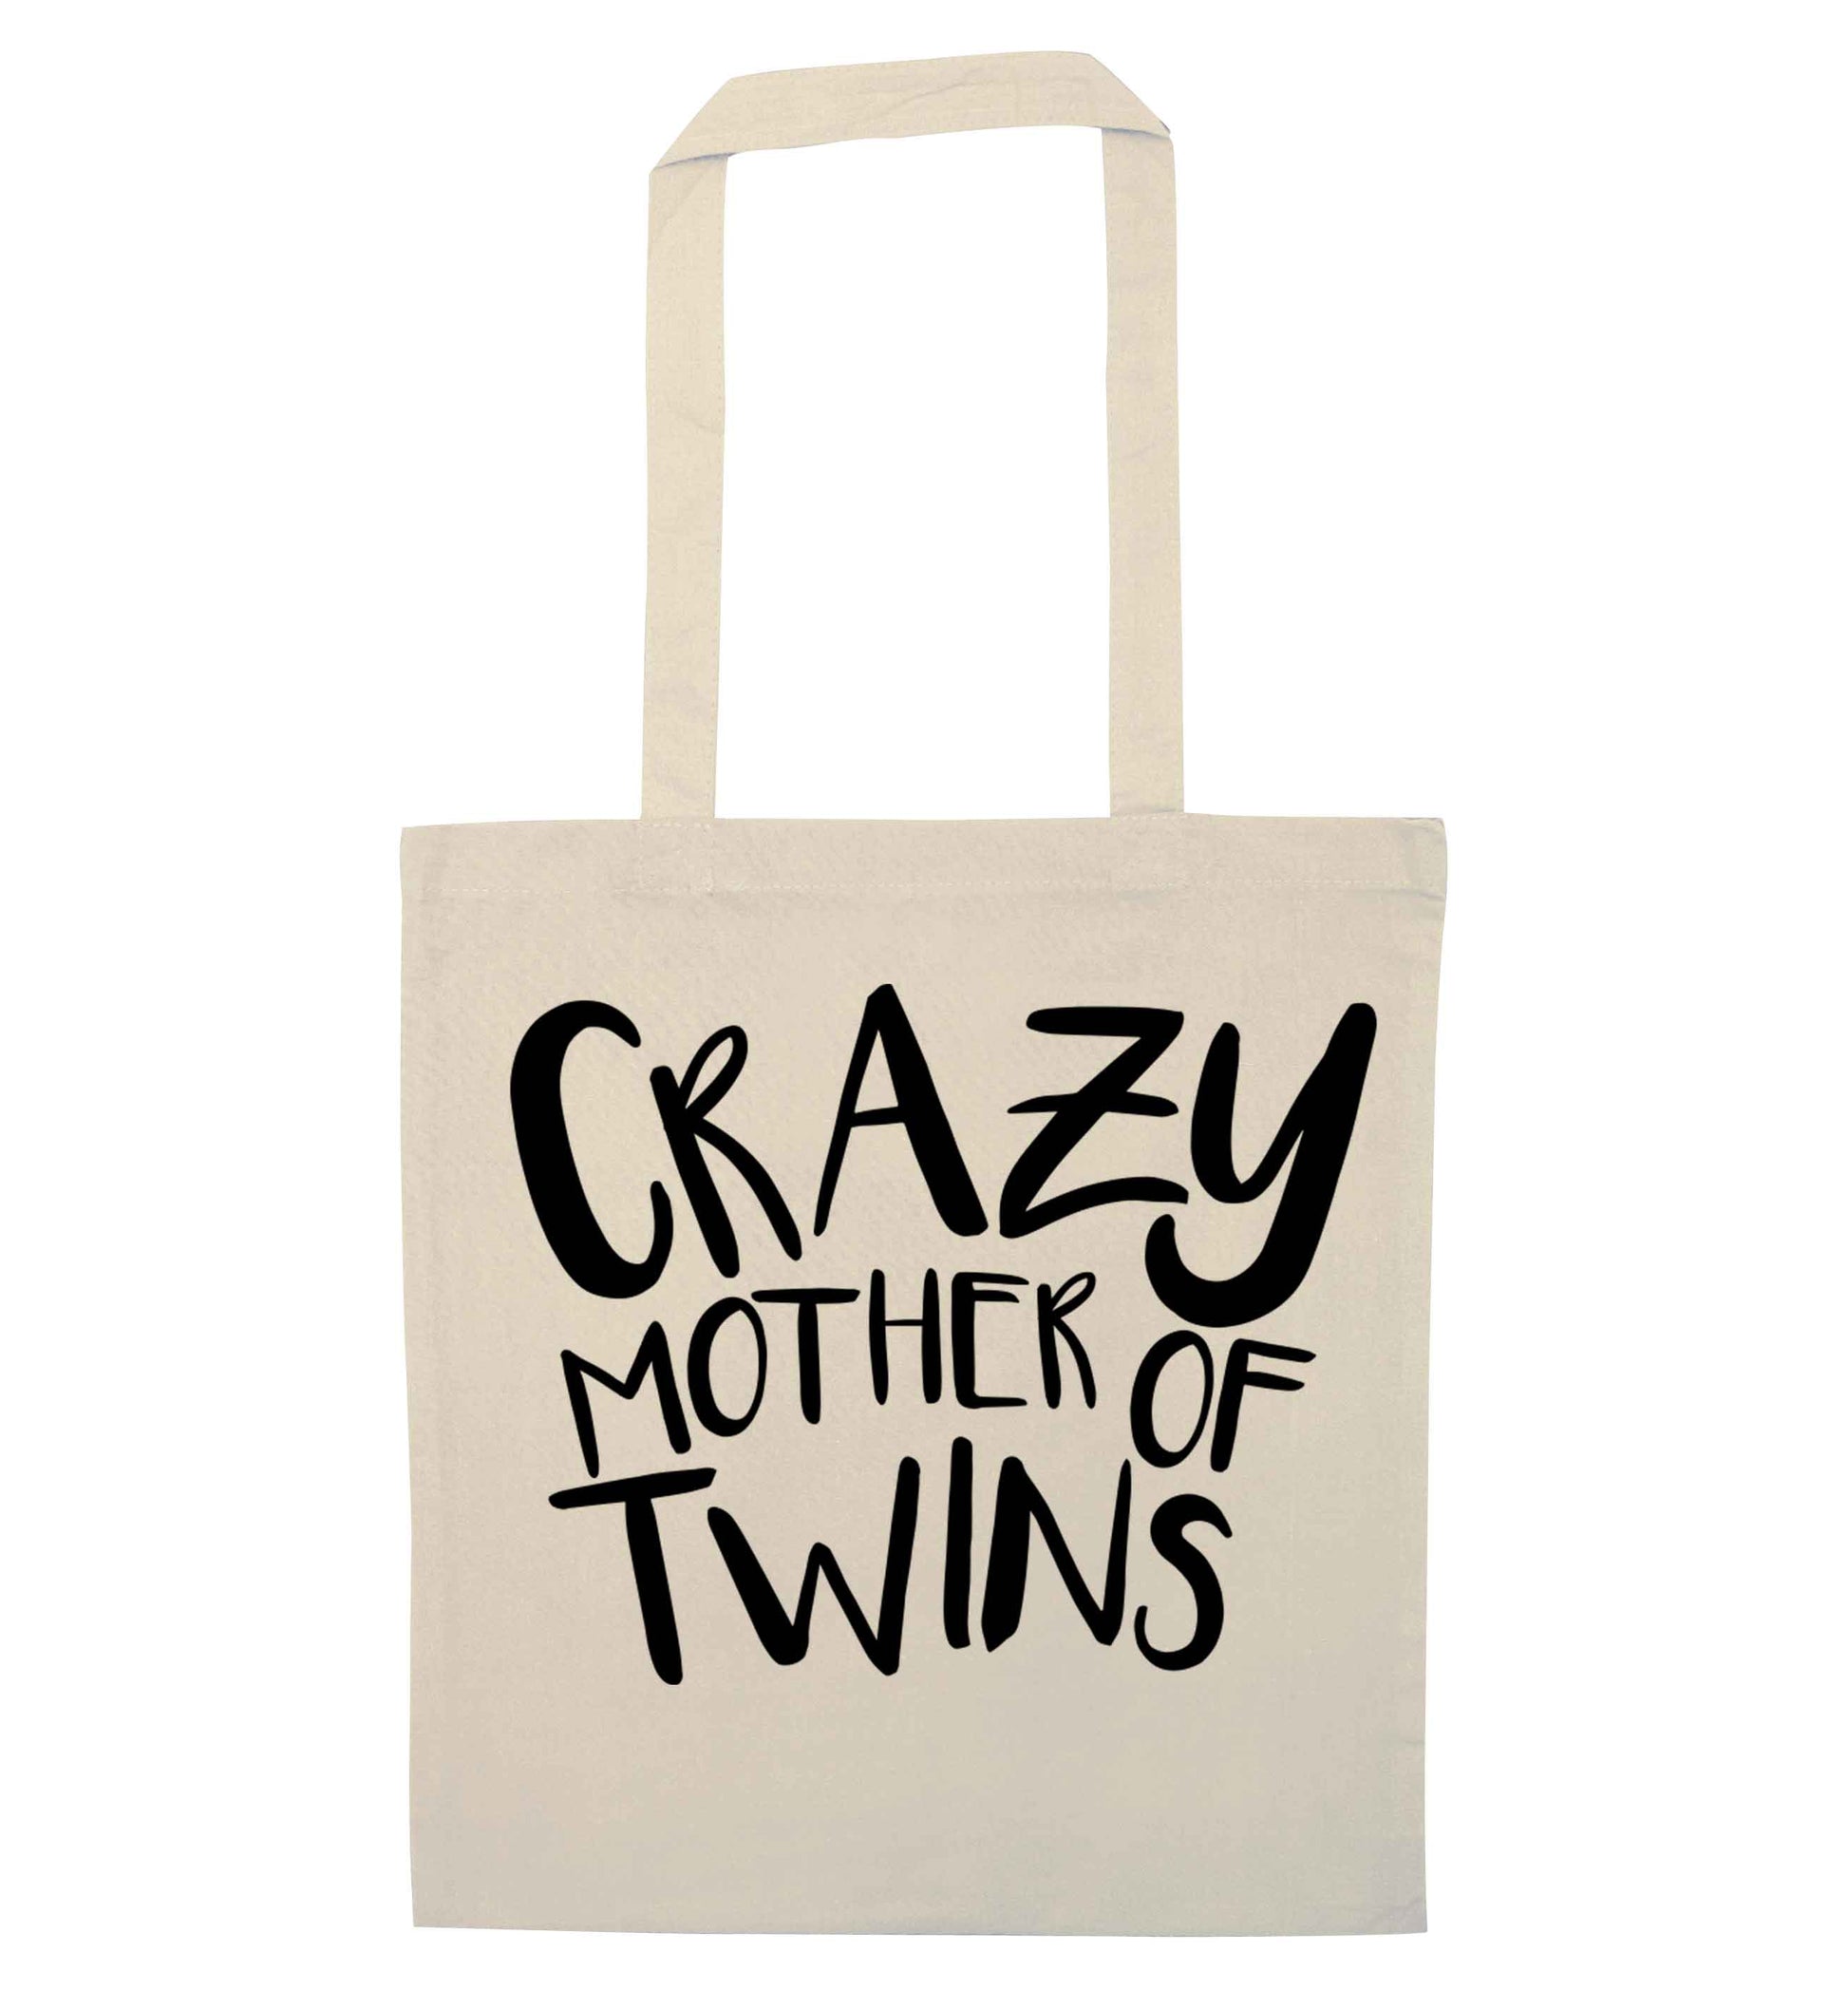 Crazy mother of twins natural tote bag